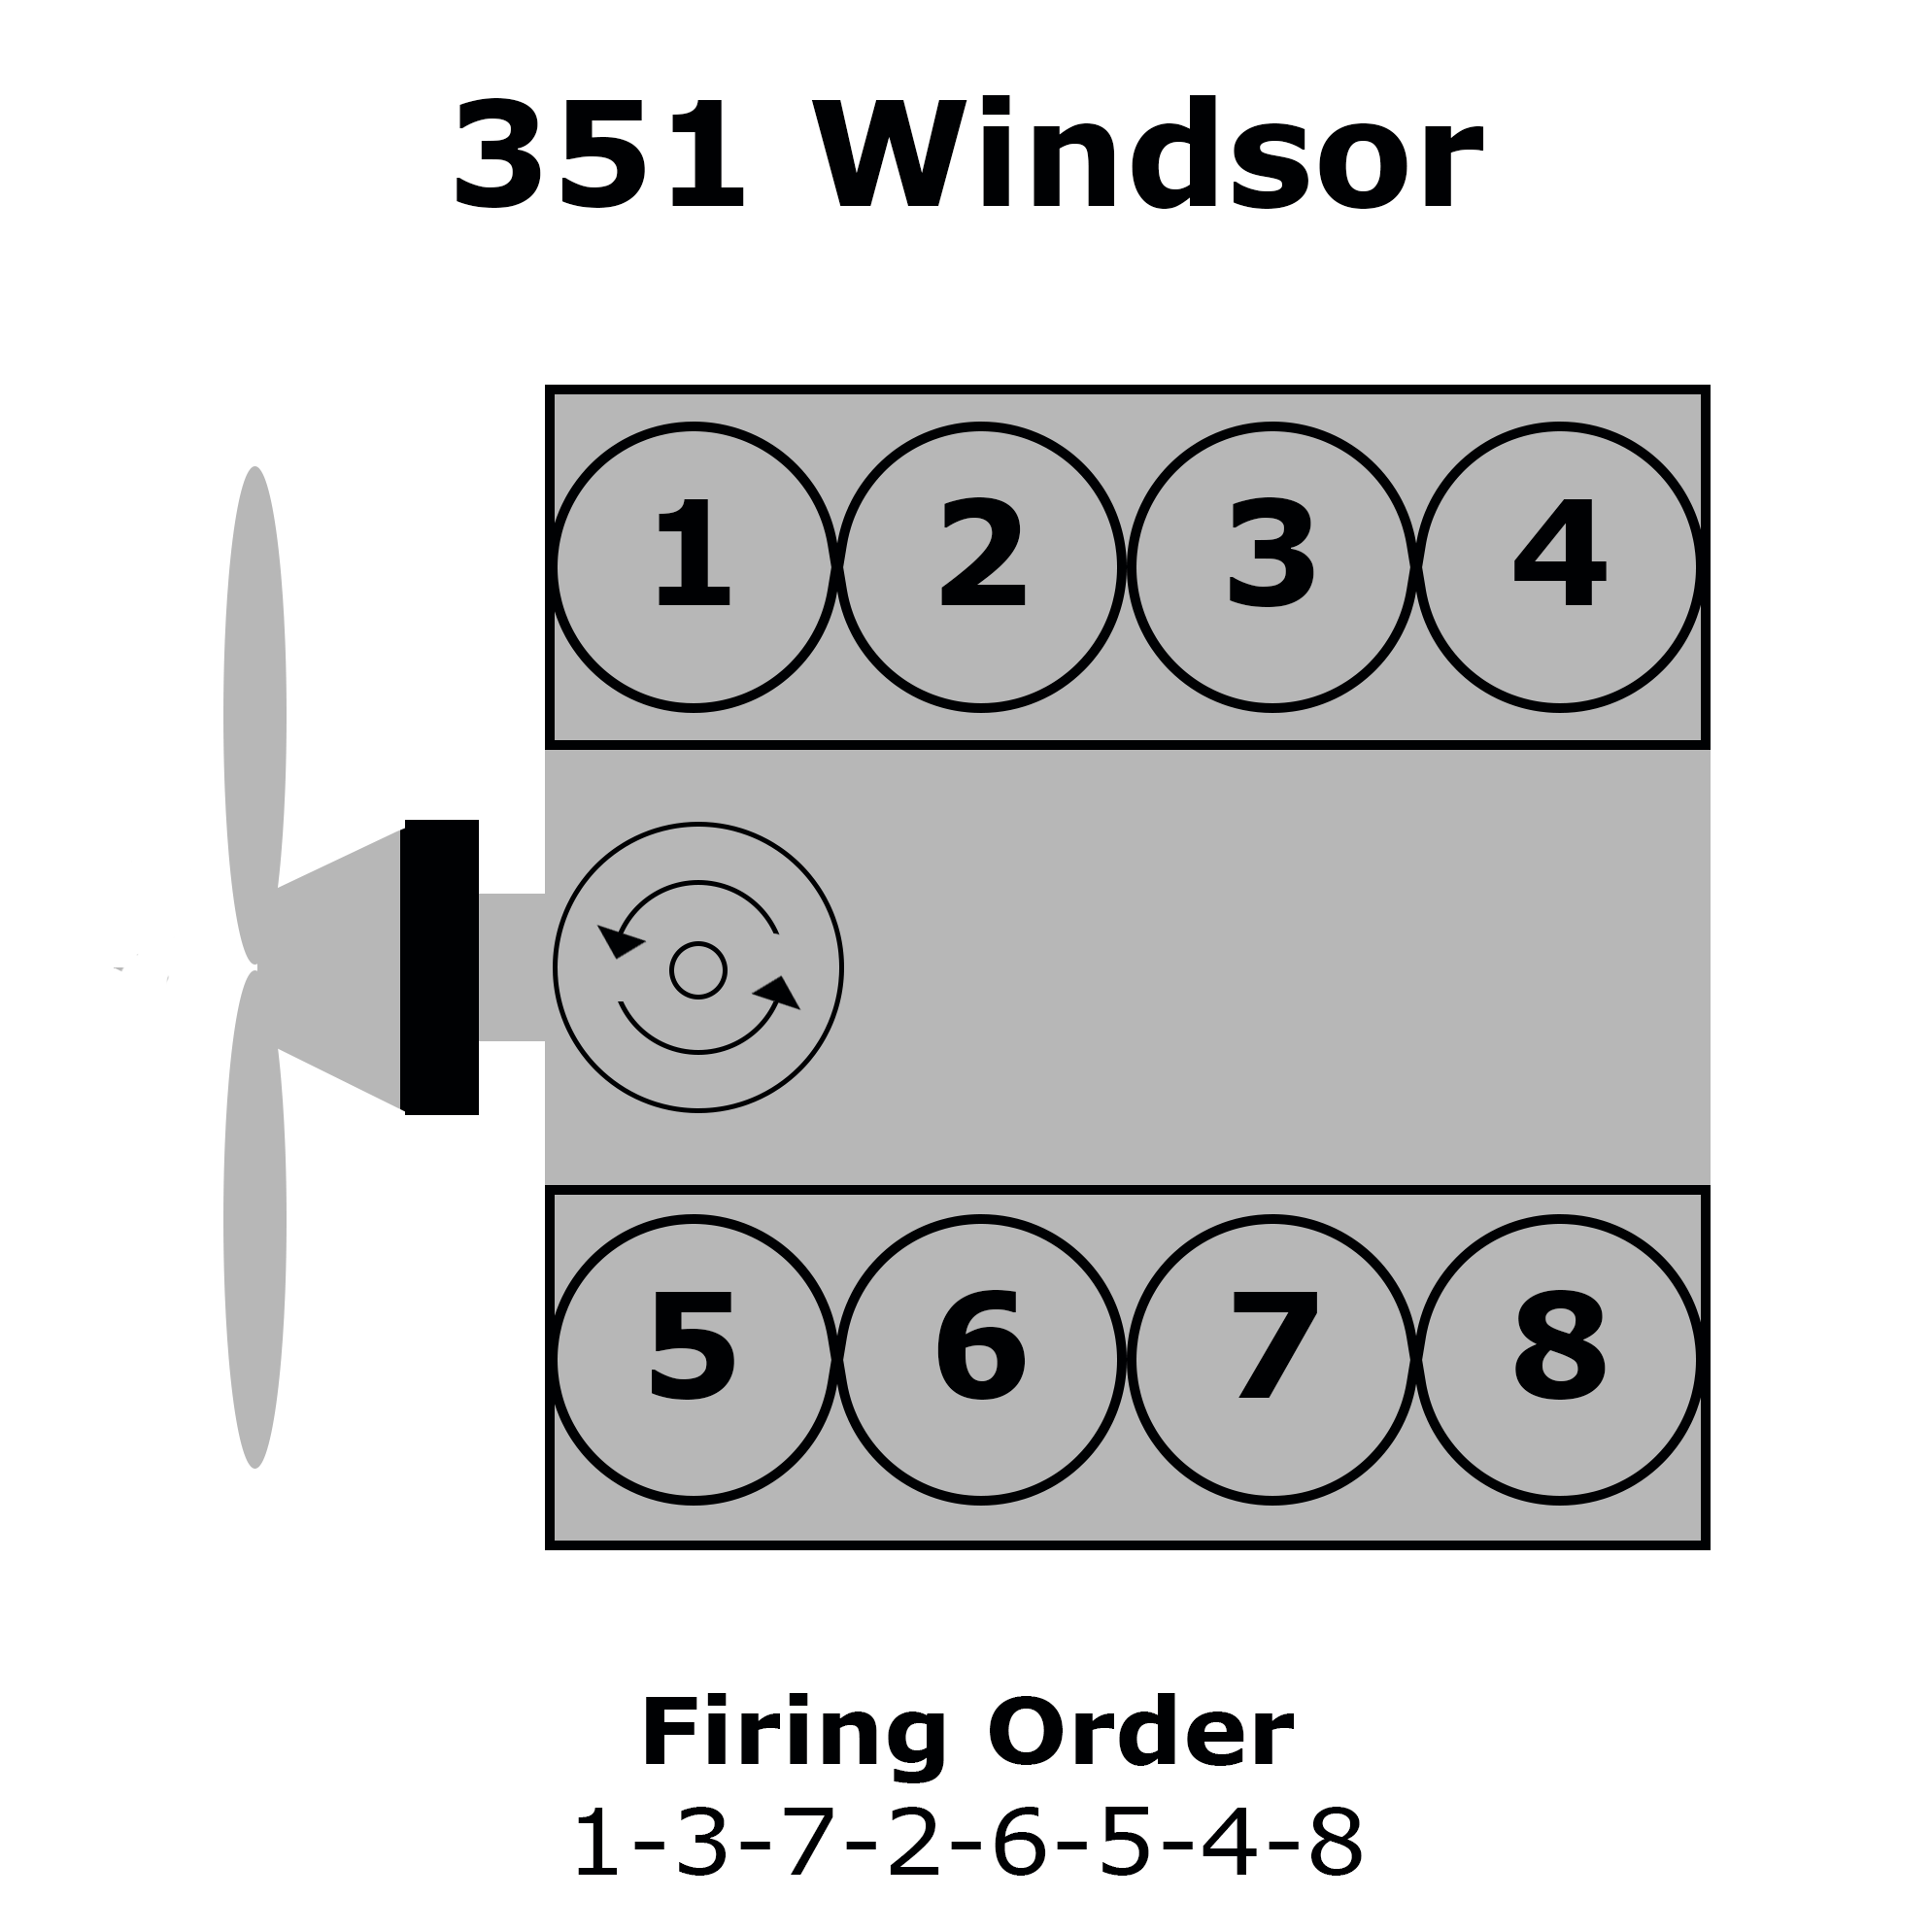 Ford 351W Cylinder Numbering, Distributor Rotation, and Firing Order